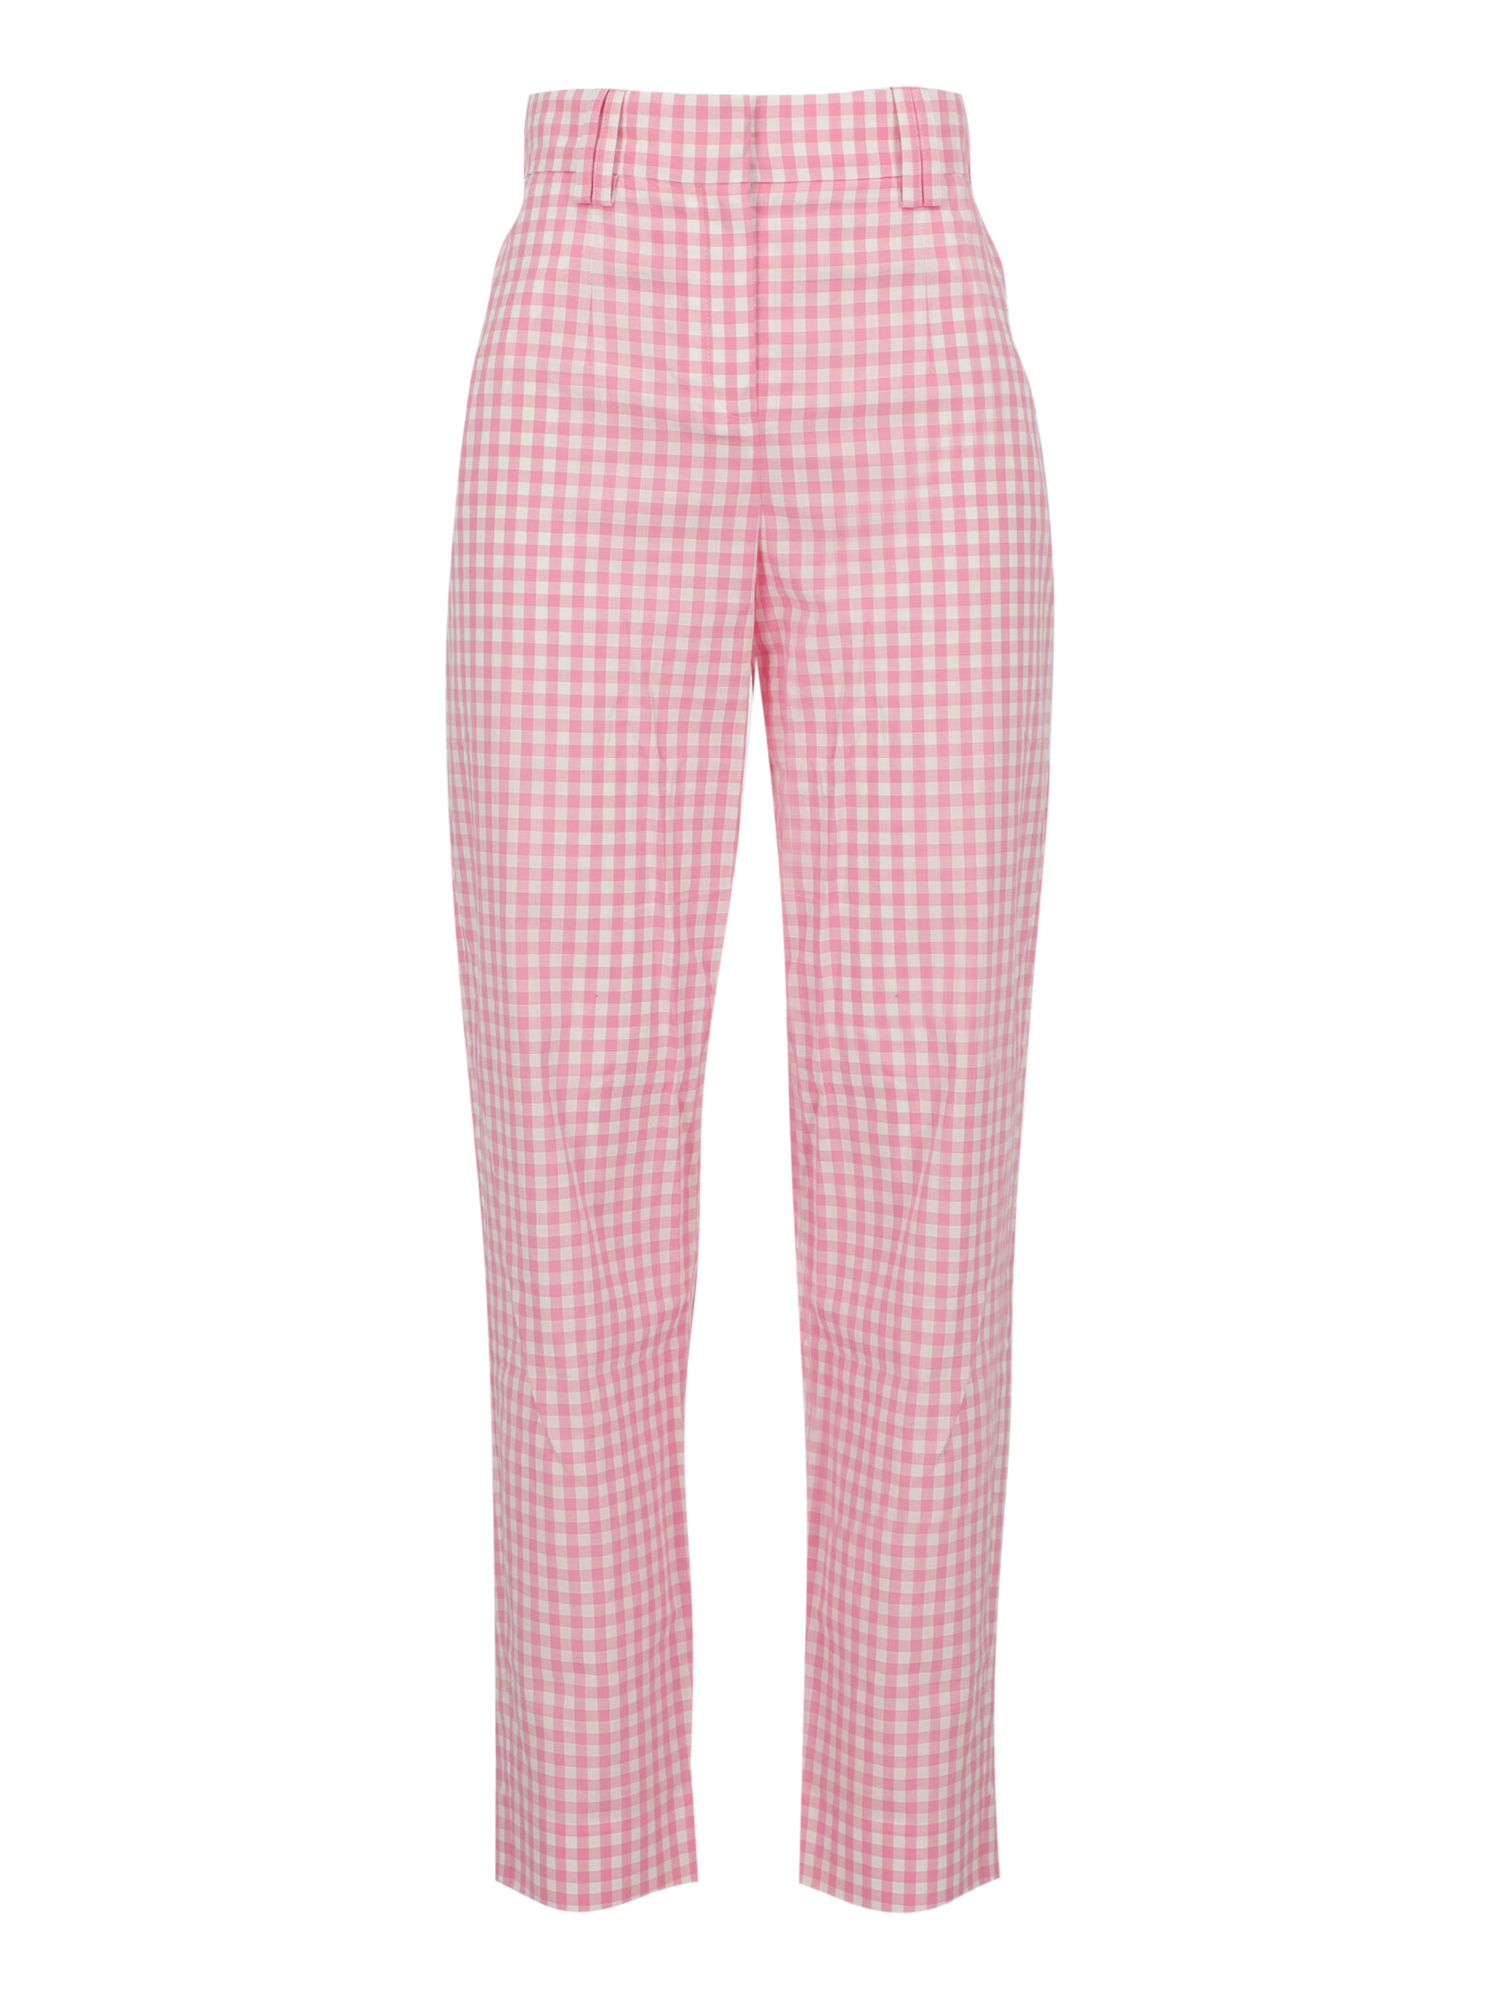 Condition: Excellent, Checked Cotton, Color: Pink, White - S - FR 36 -